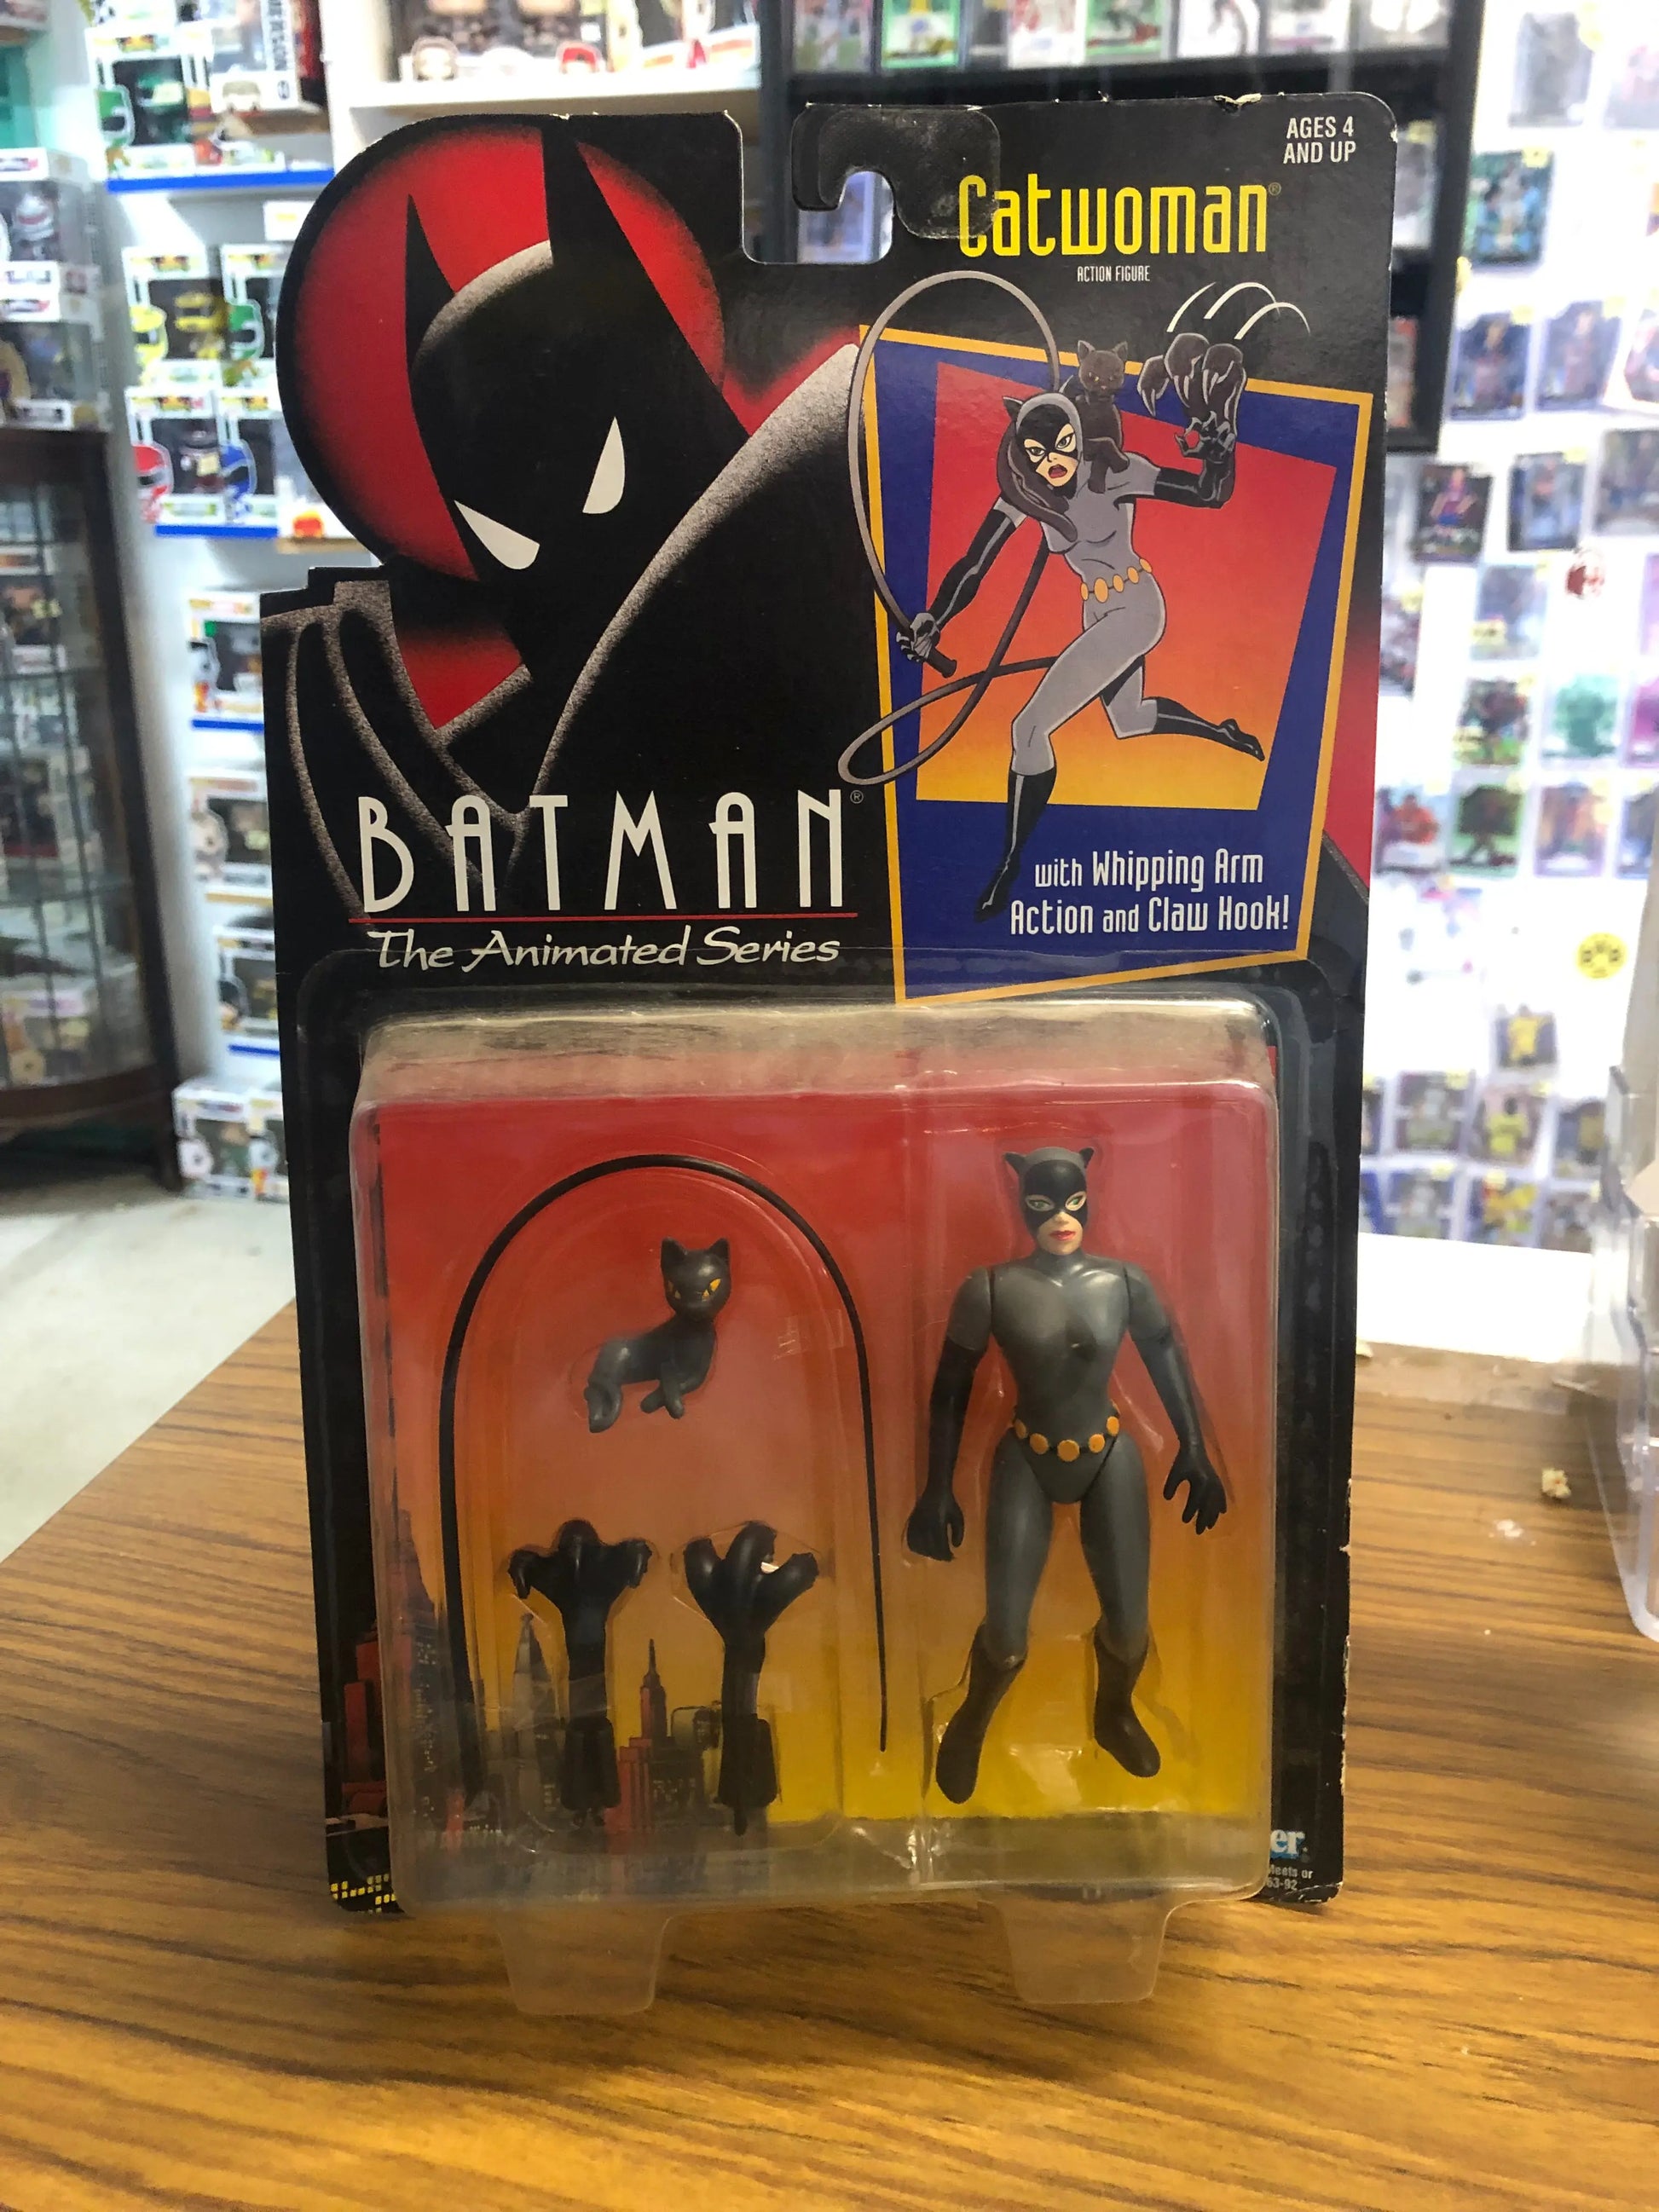 Batman The Animated Series Catwoman Action Figure 1993 Kenner FRENLY BRICKS - Open 7 Days